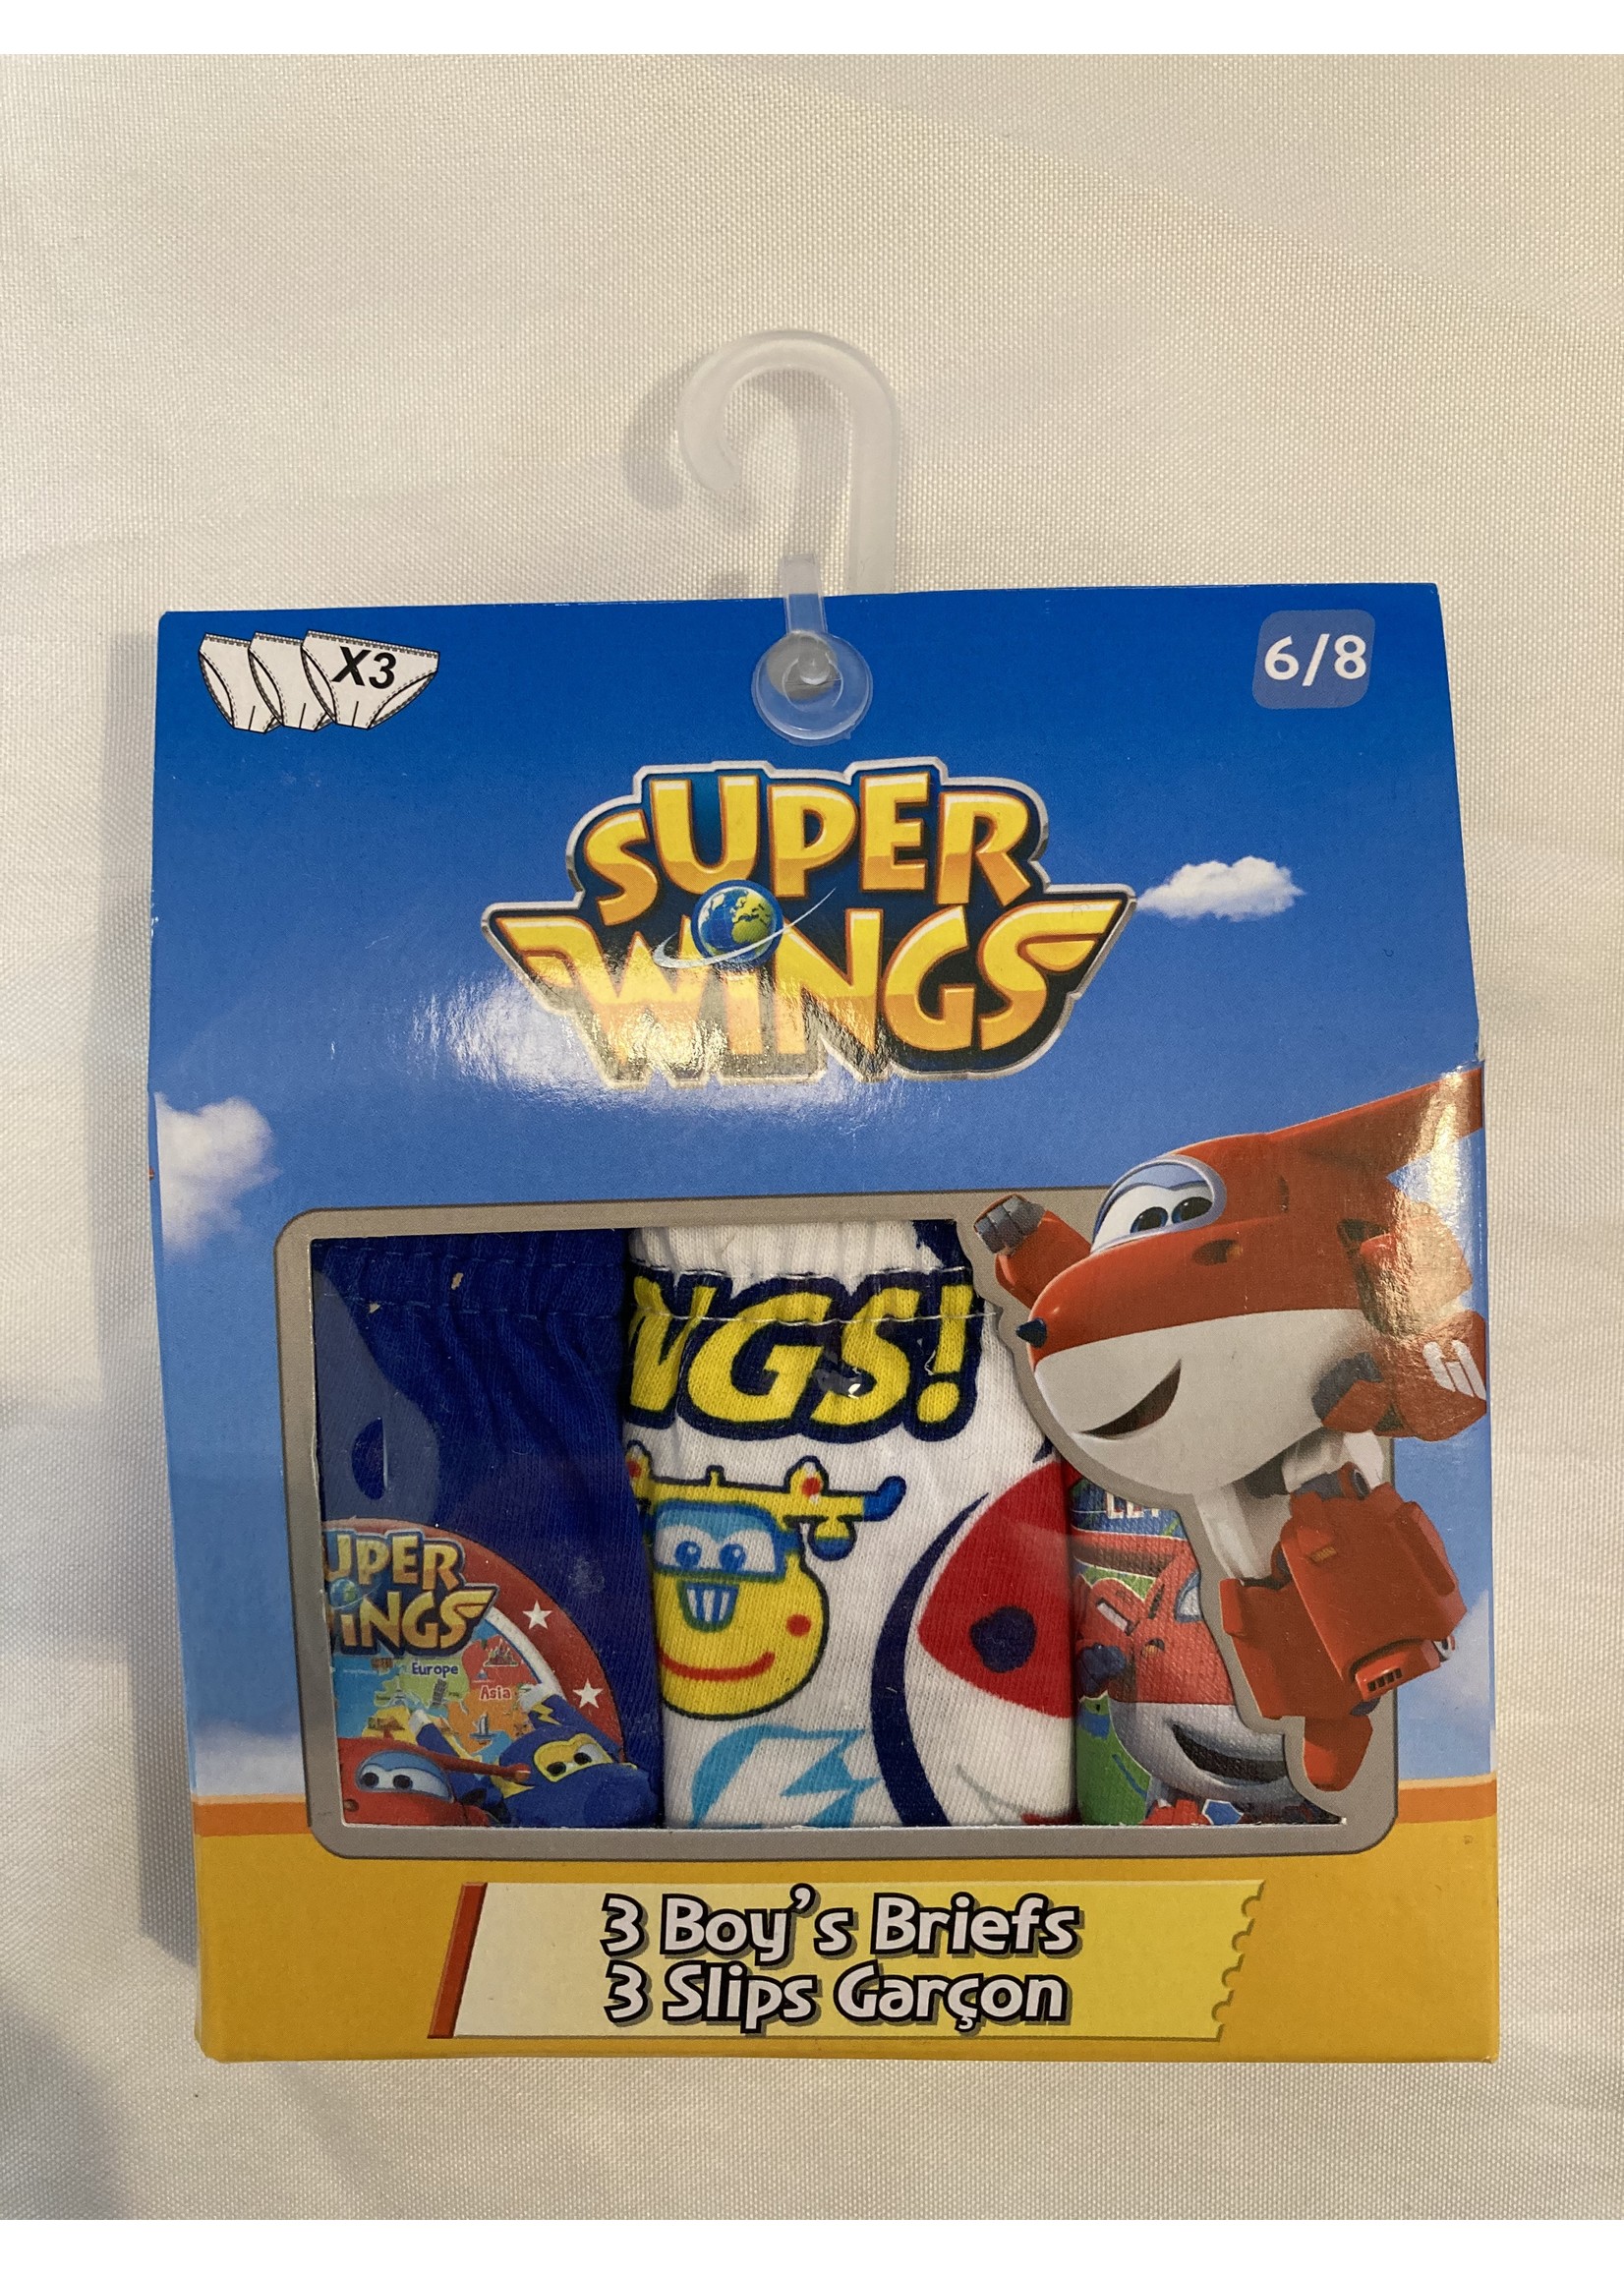 SUPER WINGS Briefs from SuperWings 3 pack